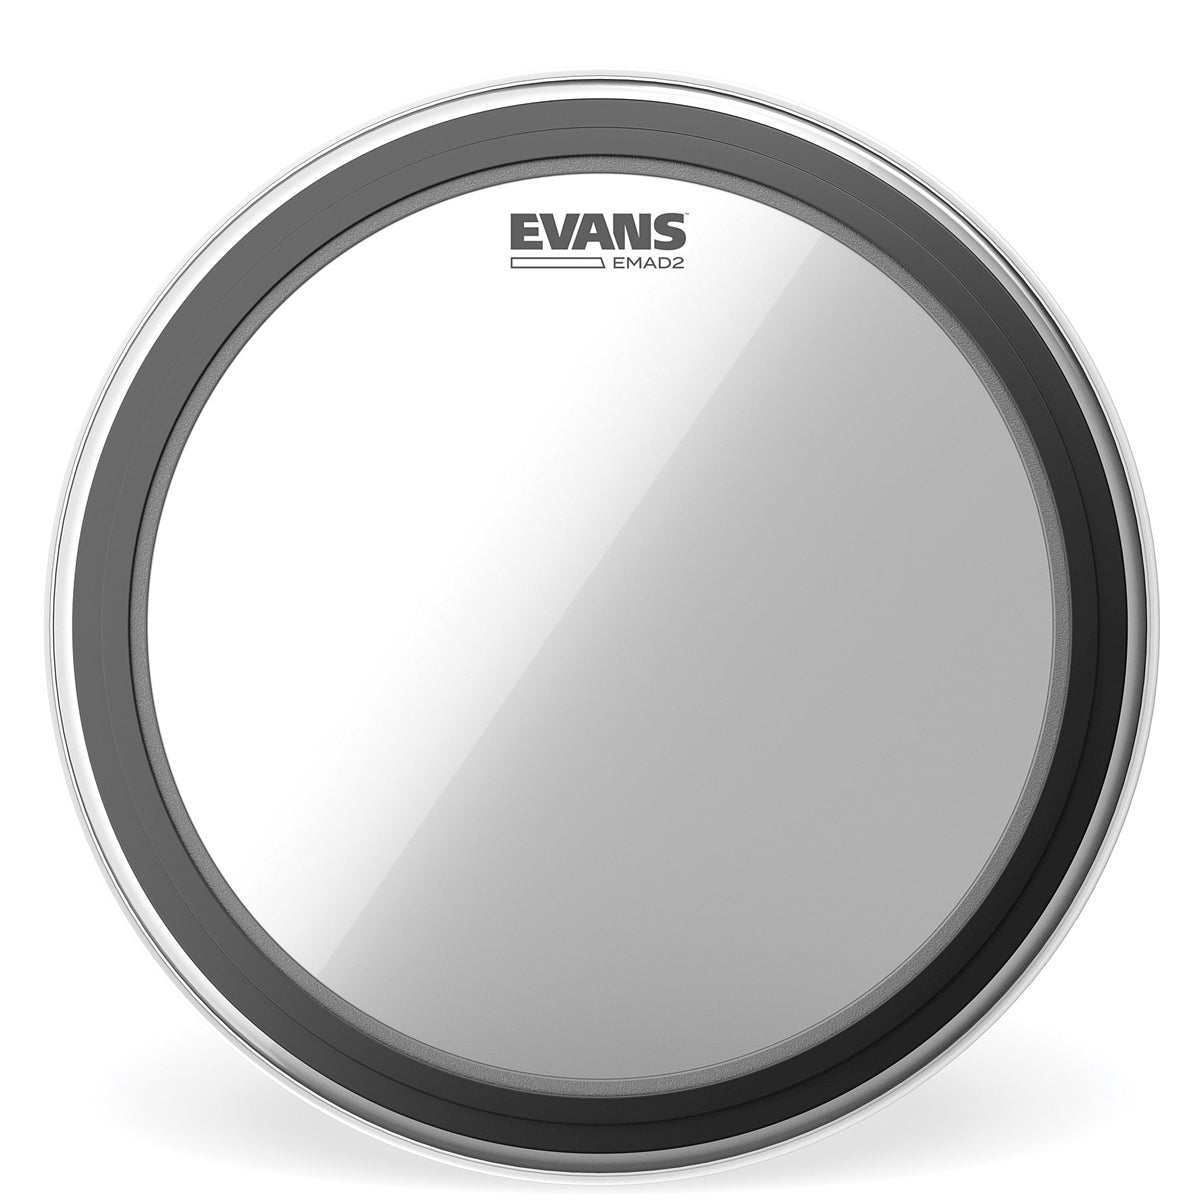 Evans BD22EMAD2 EMAD2 Clear 22" Drumhead